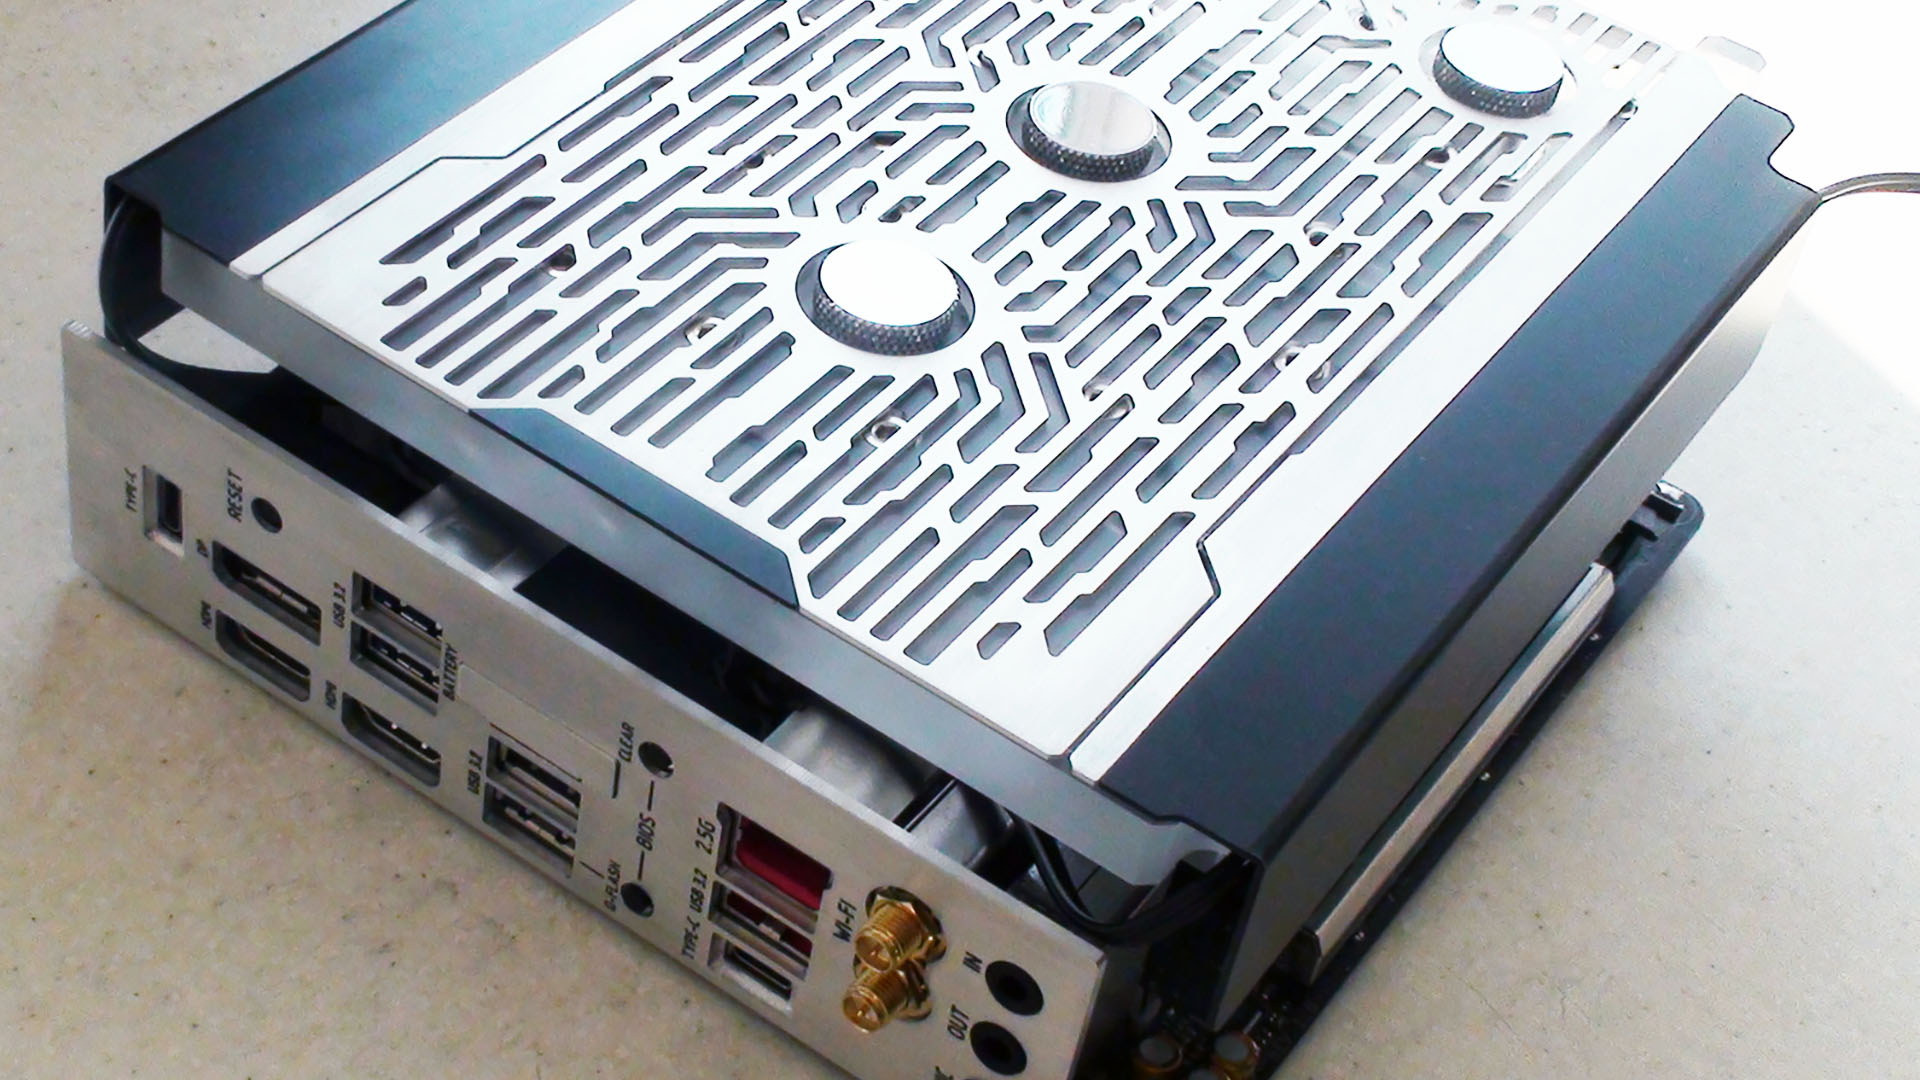 The motherboard block of the symmetry essence gaming pc